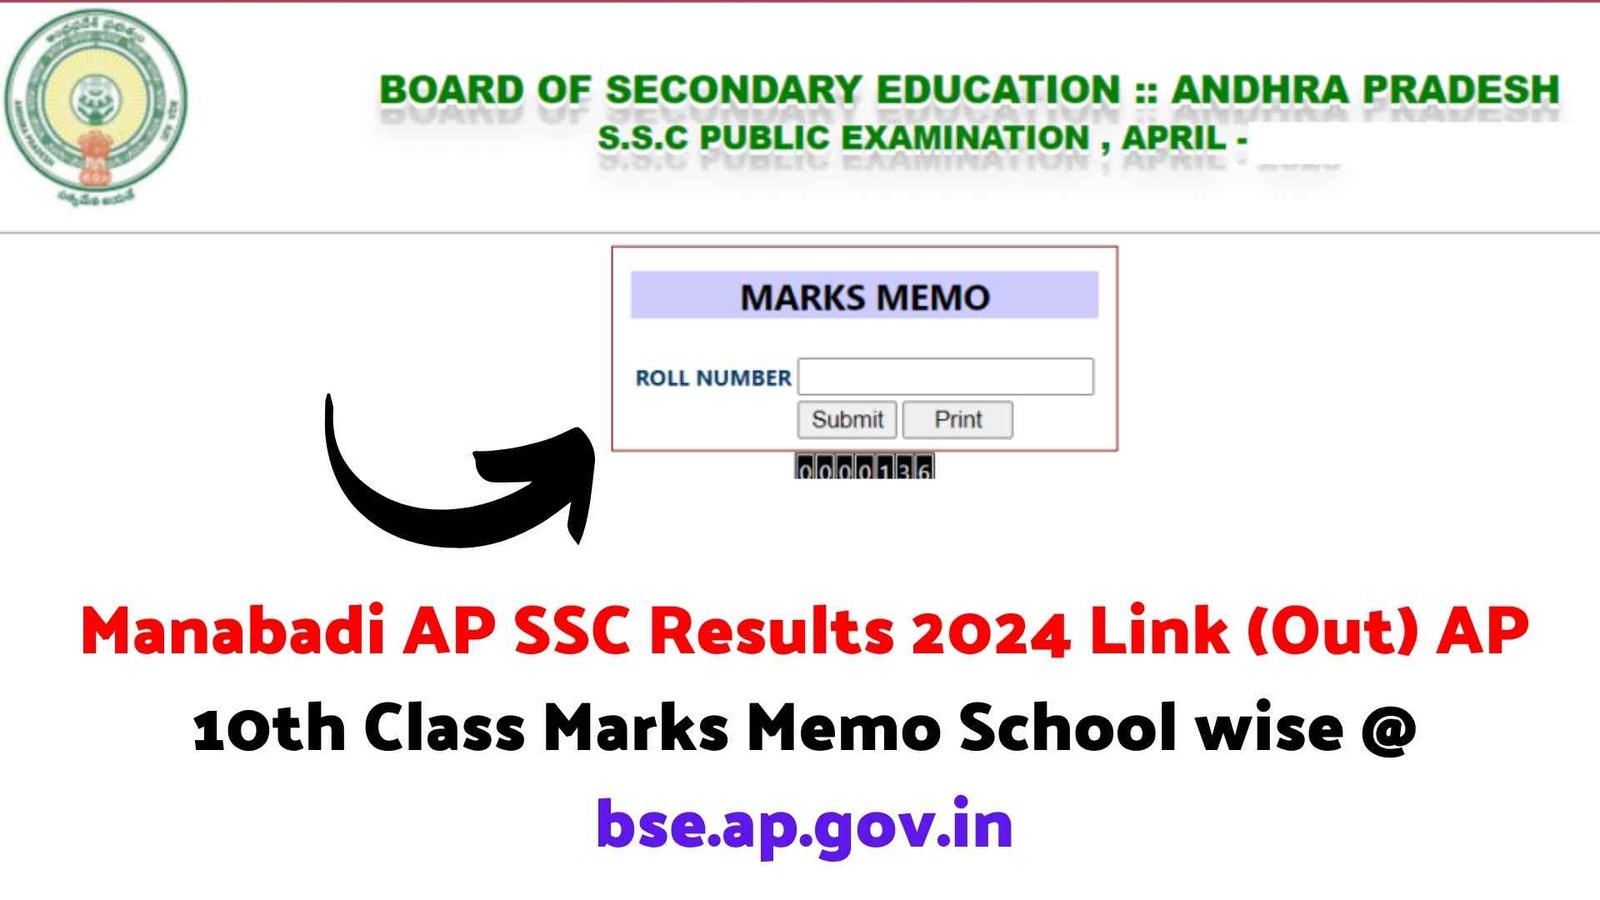 Manabadi AP SSC Results 2024 Link (Out) AP 10th Class Marks Memo School wise @ bse.ap.gov.in